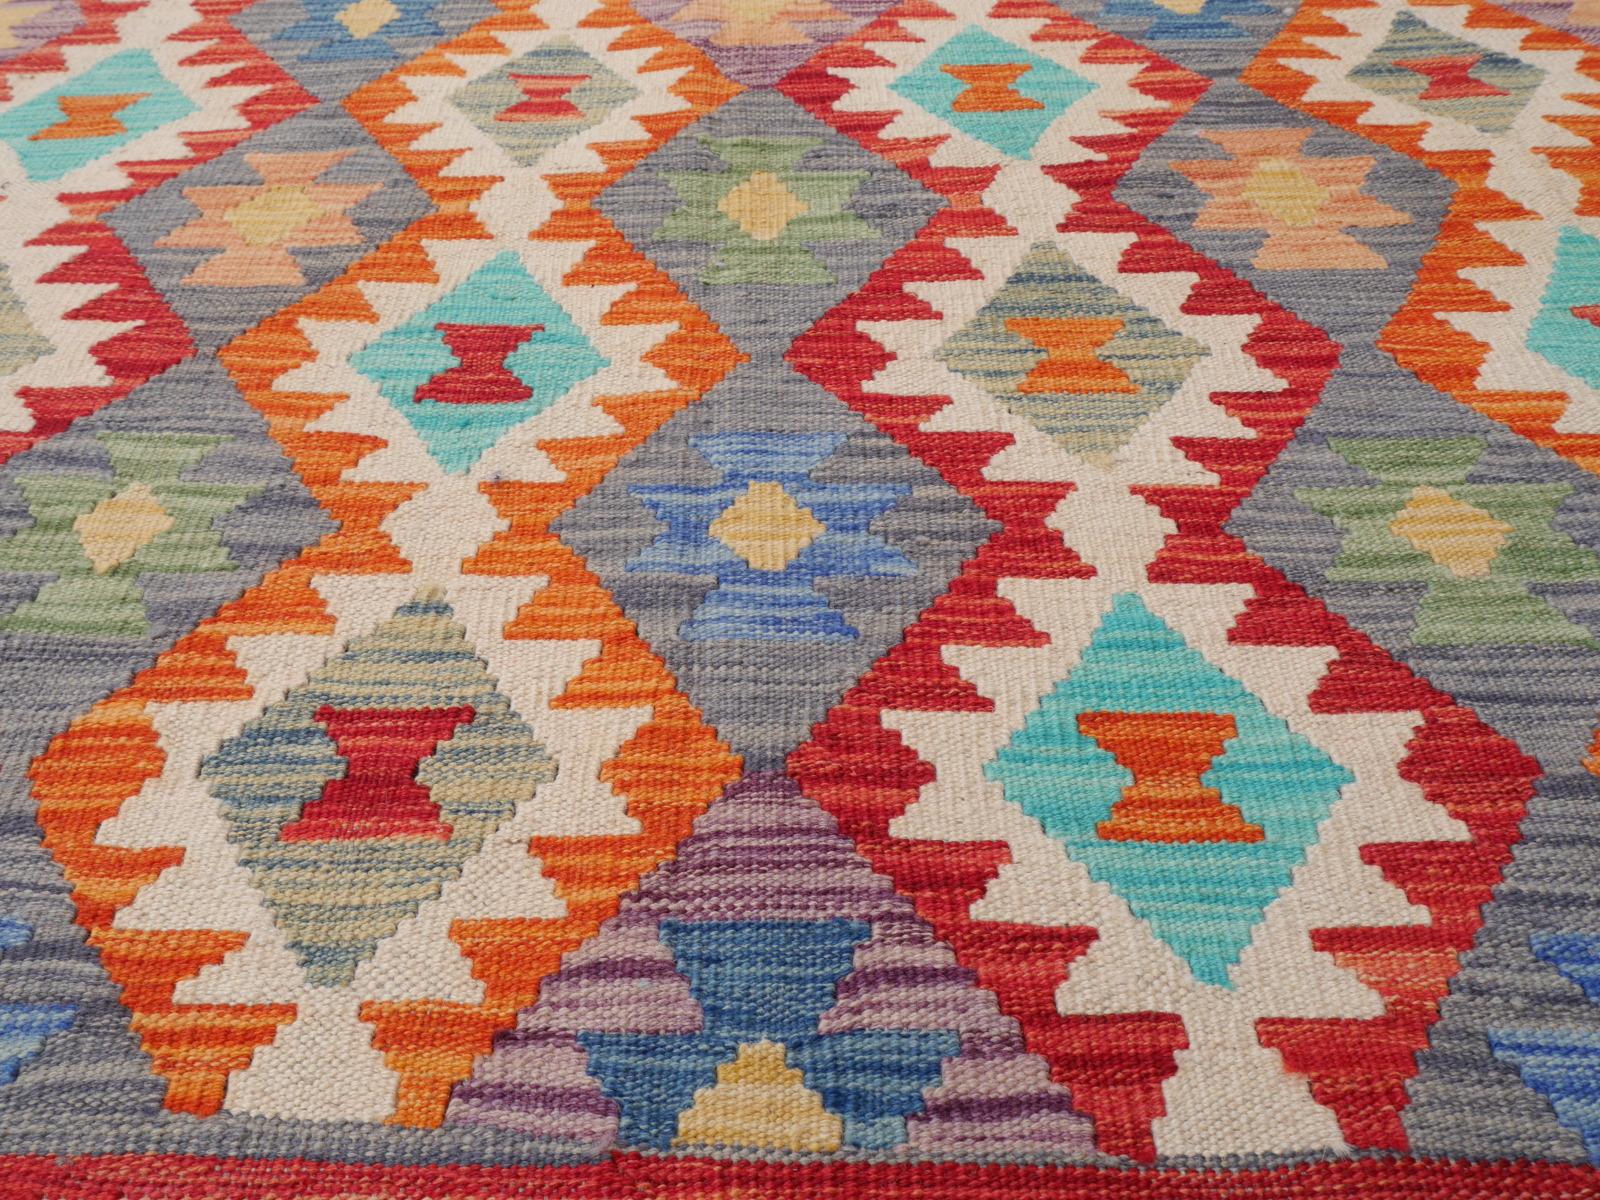 Arijana Kilim Rug hand-woven carpet
Arijana Kilim rugs are made by tribes in southern Afghanistan close to the Pakistan border.
Arijana carpets are of high quality. This Kilim Rug was hand woven with natural pigment dyed wool, the Diamond Design